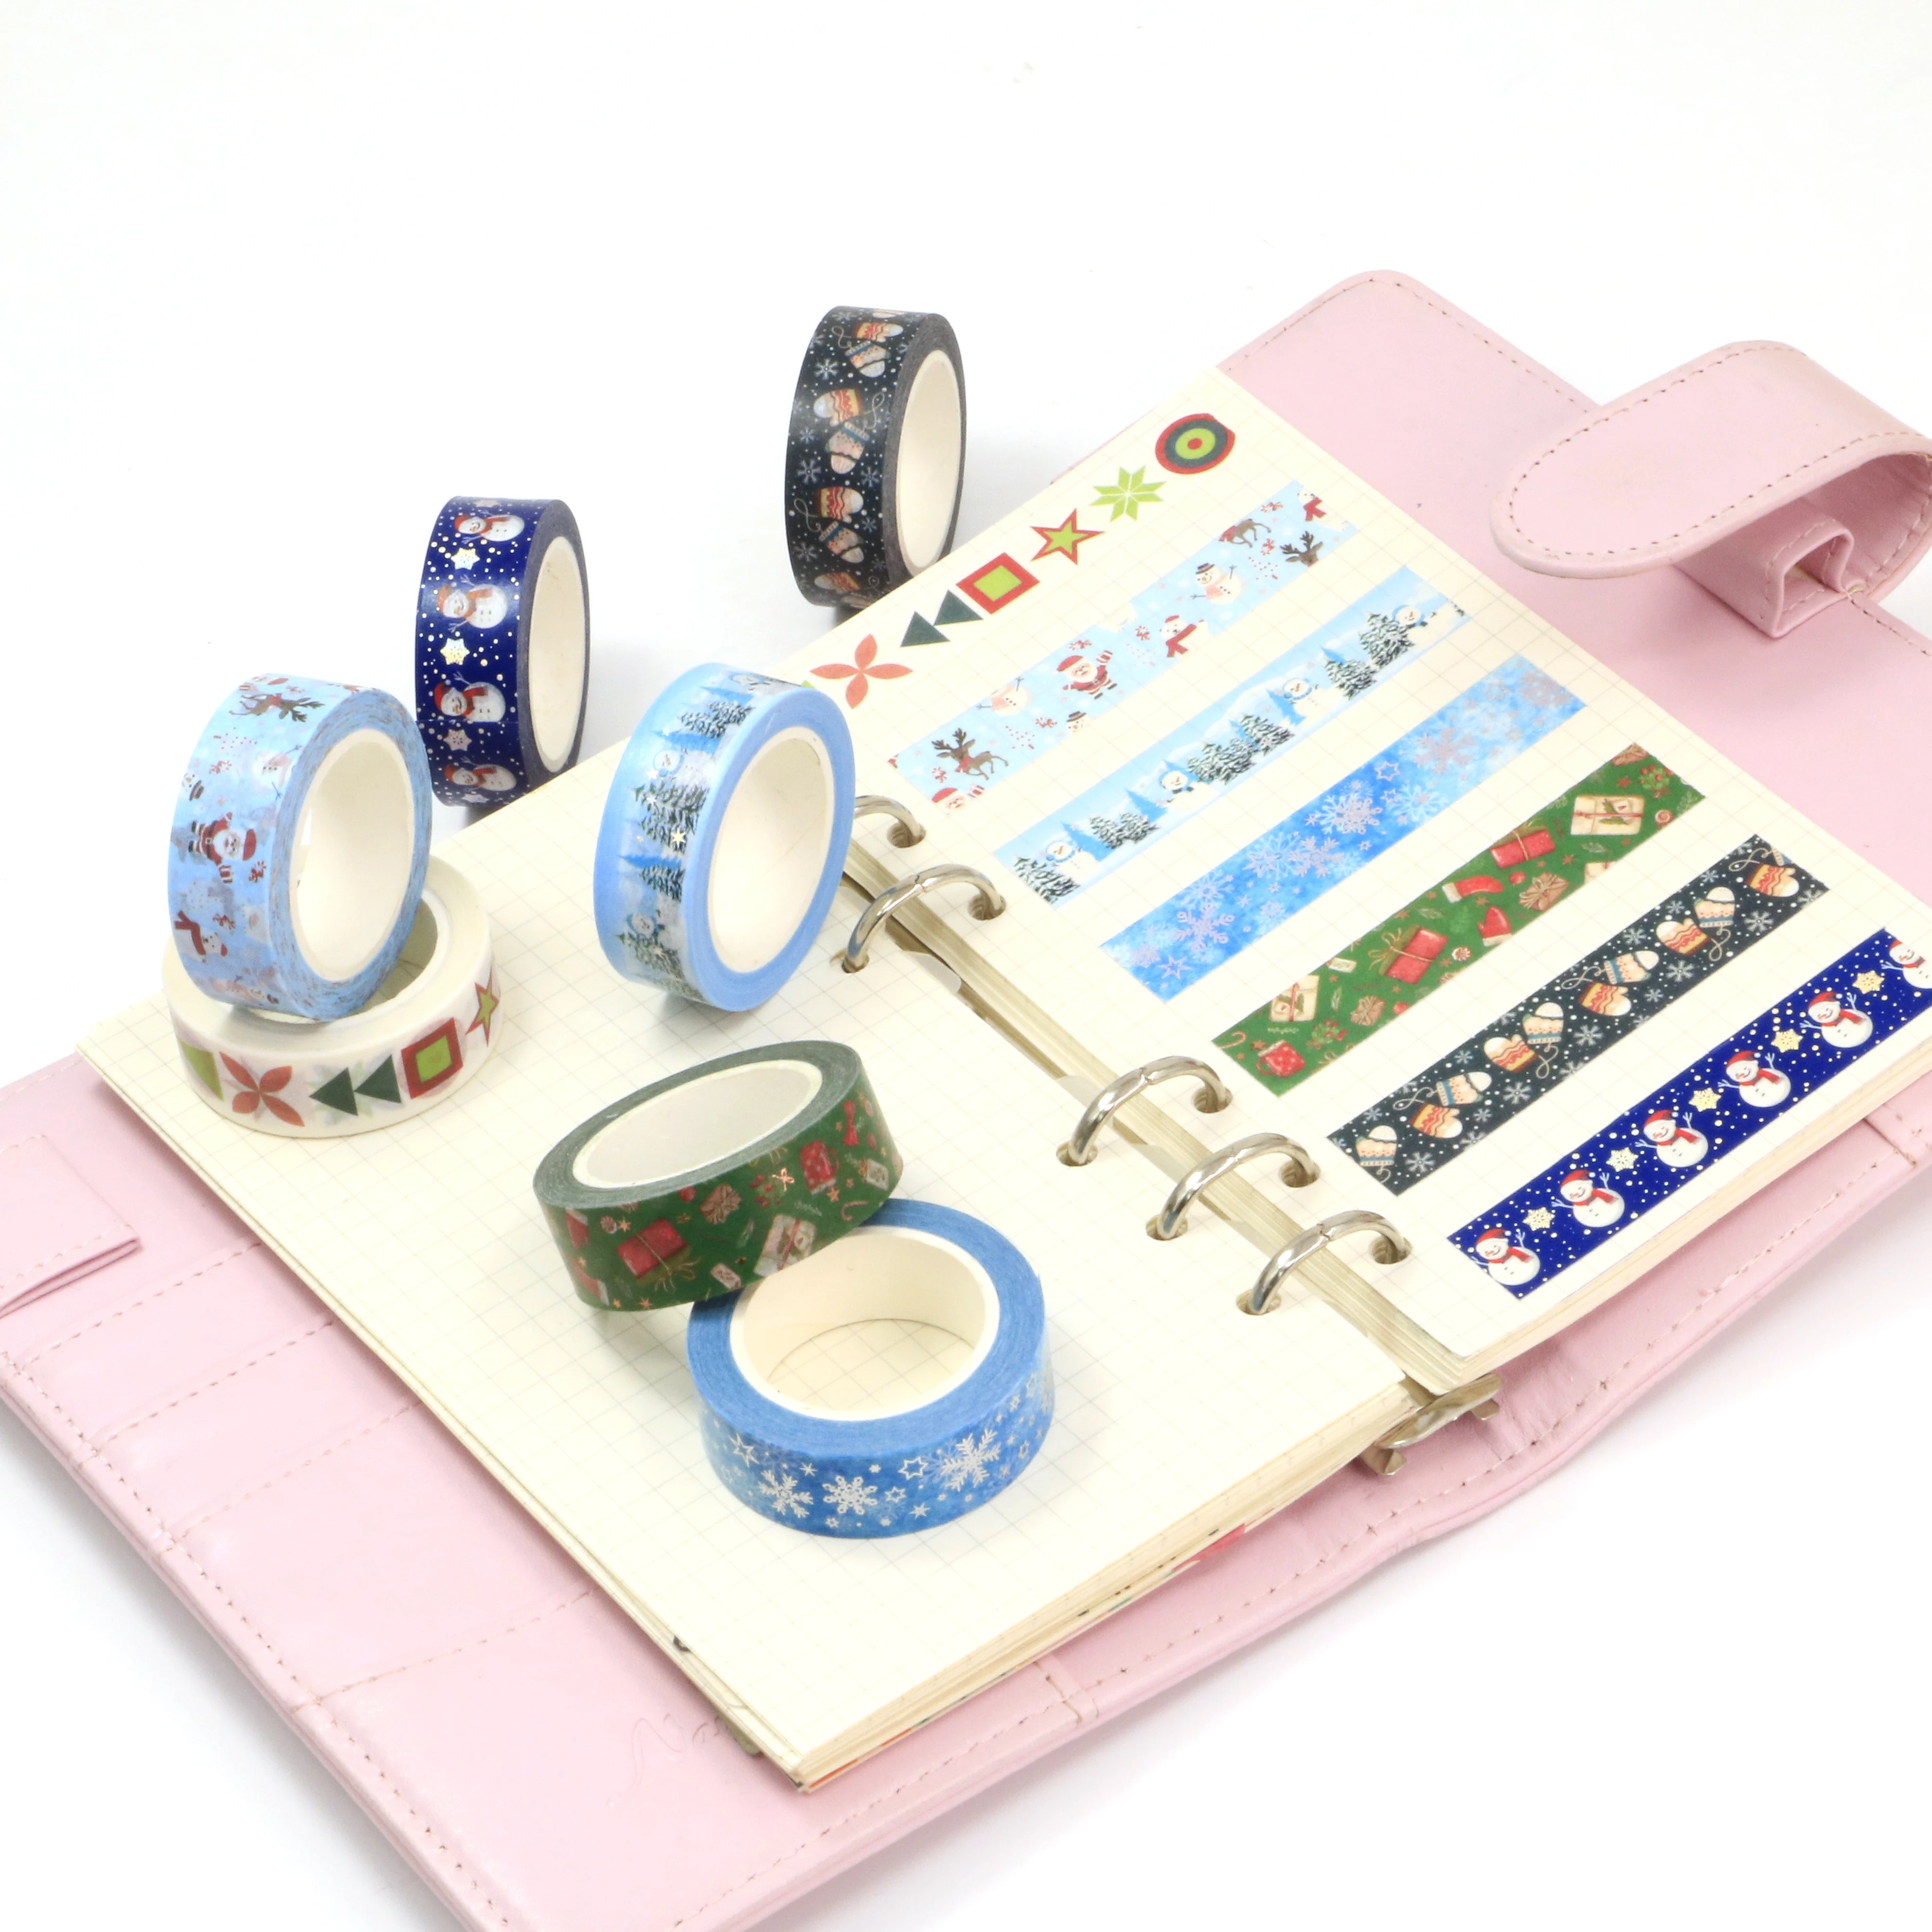 

NEW 1PC 10M Deco Silver Foil Christmas Trees Glove Snowman Adhesive Masking Washi Tape Set for Gift Wrap & Journaling Stationery